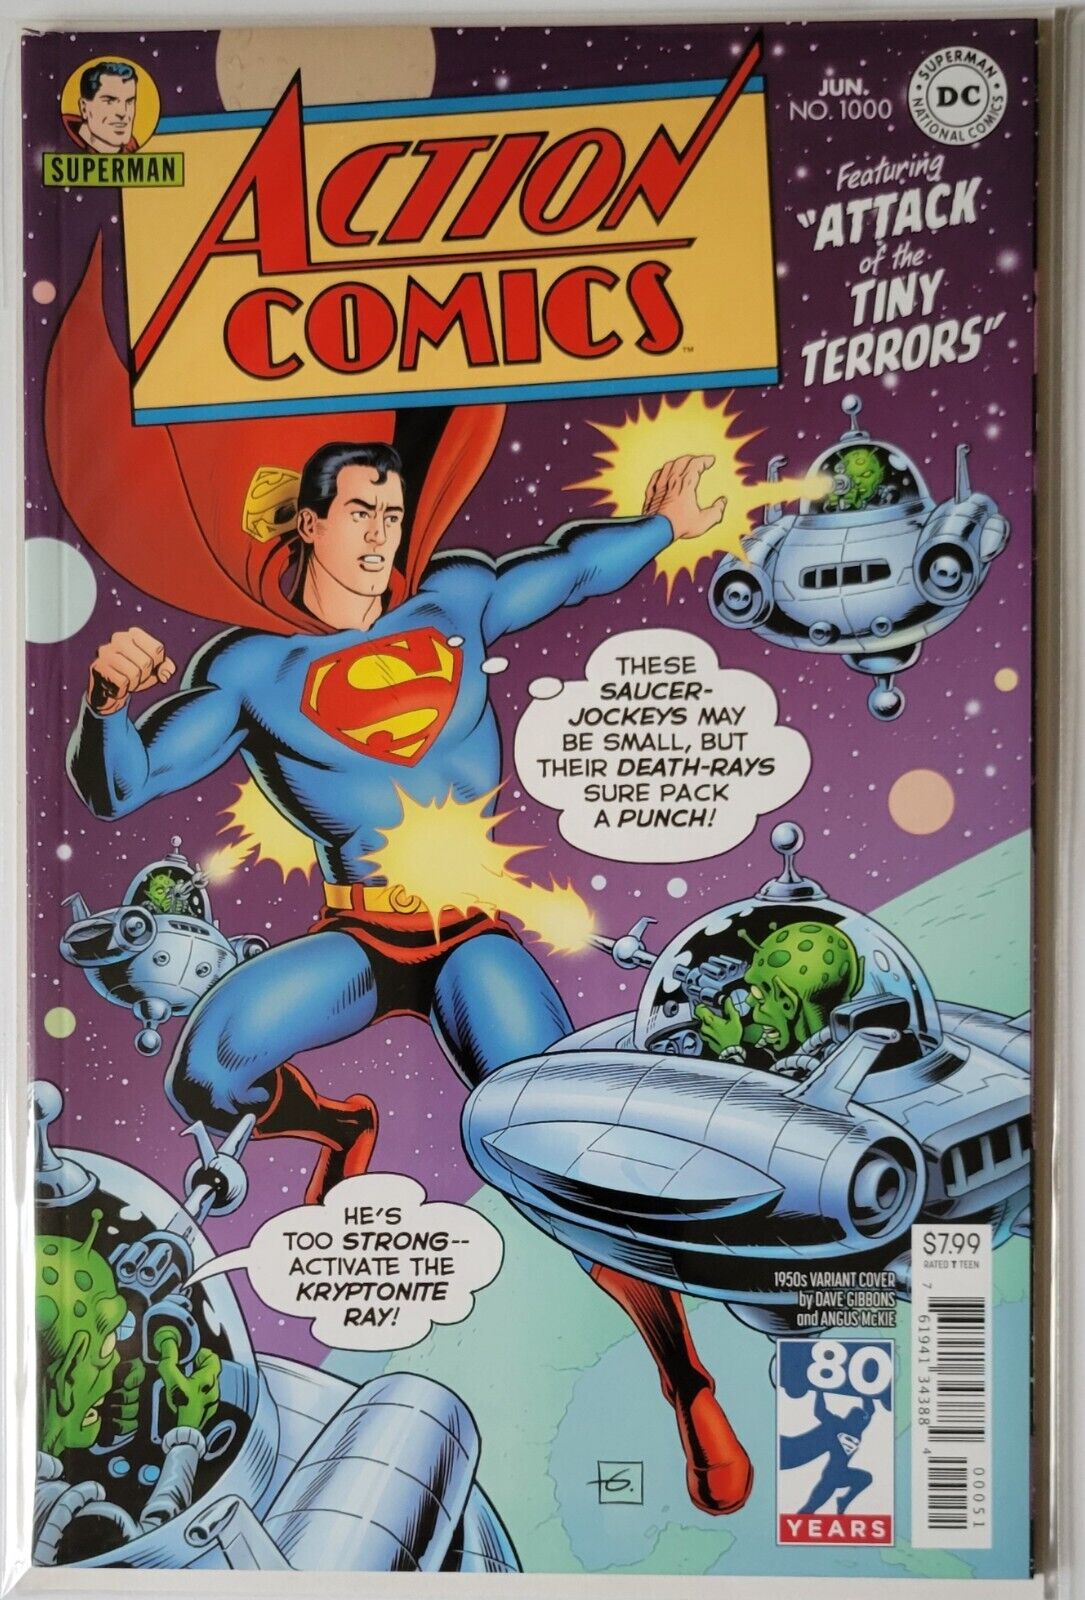 SUPERMAN ACTION COMICS #1000 GIBBONS 1950's VARIANT DC 2018 80th ANNIVERSARY NM